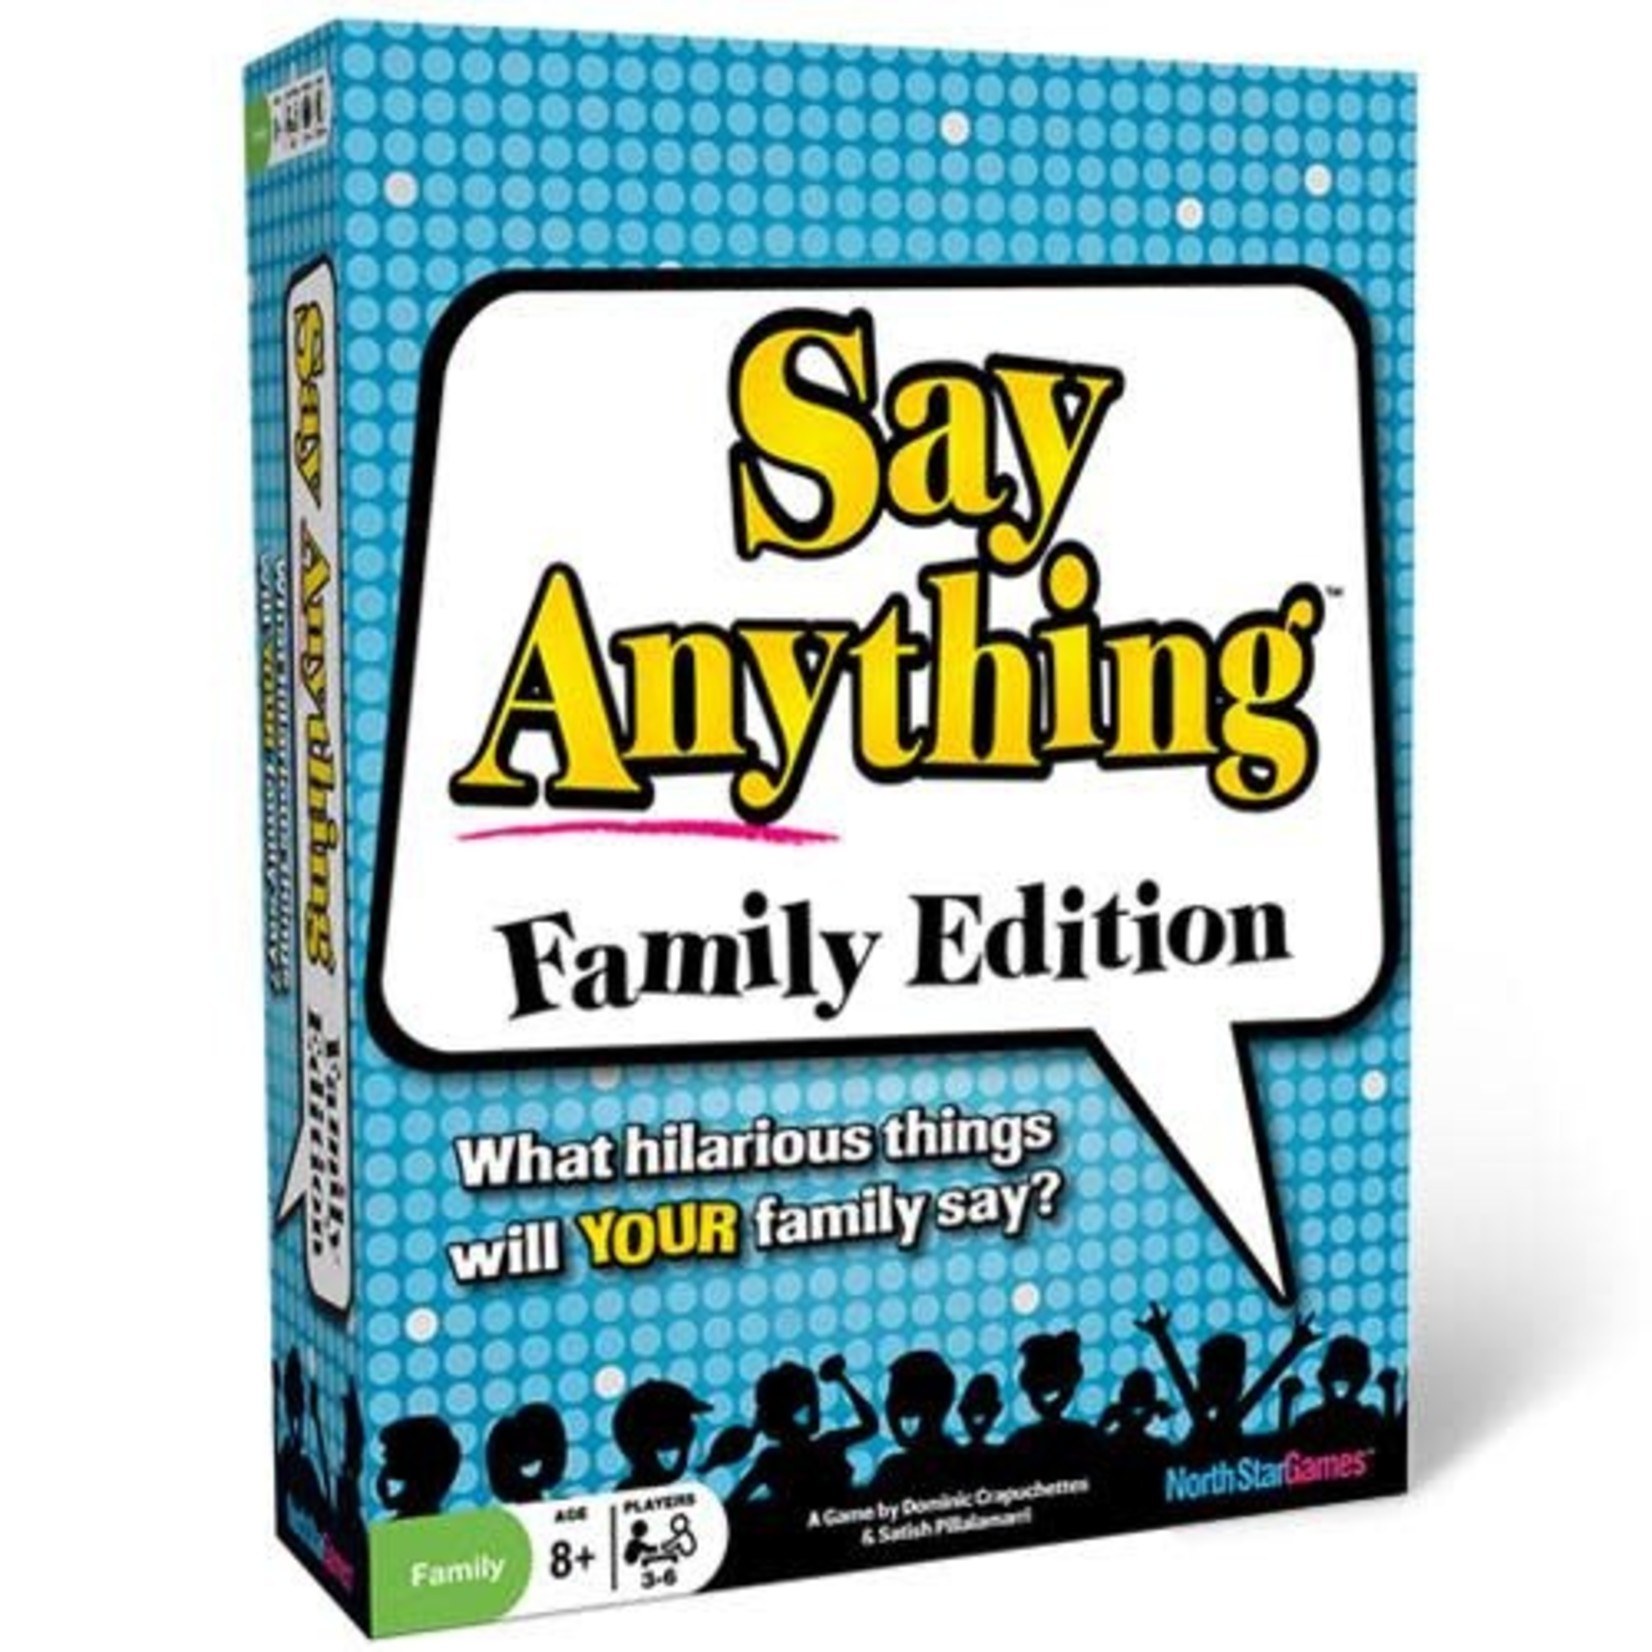 North Star Games Say Anything: Family Edition